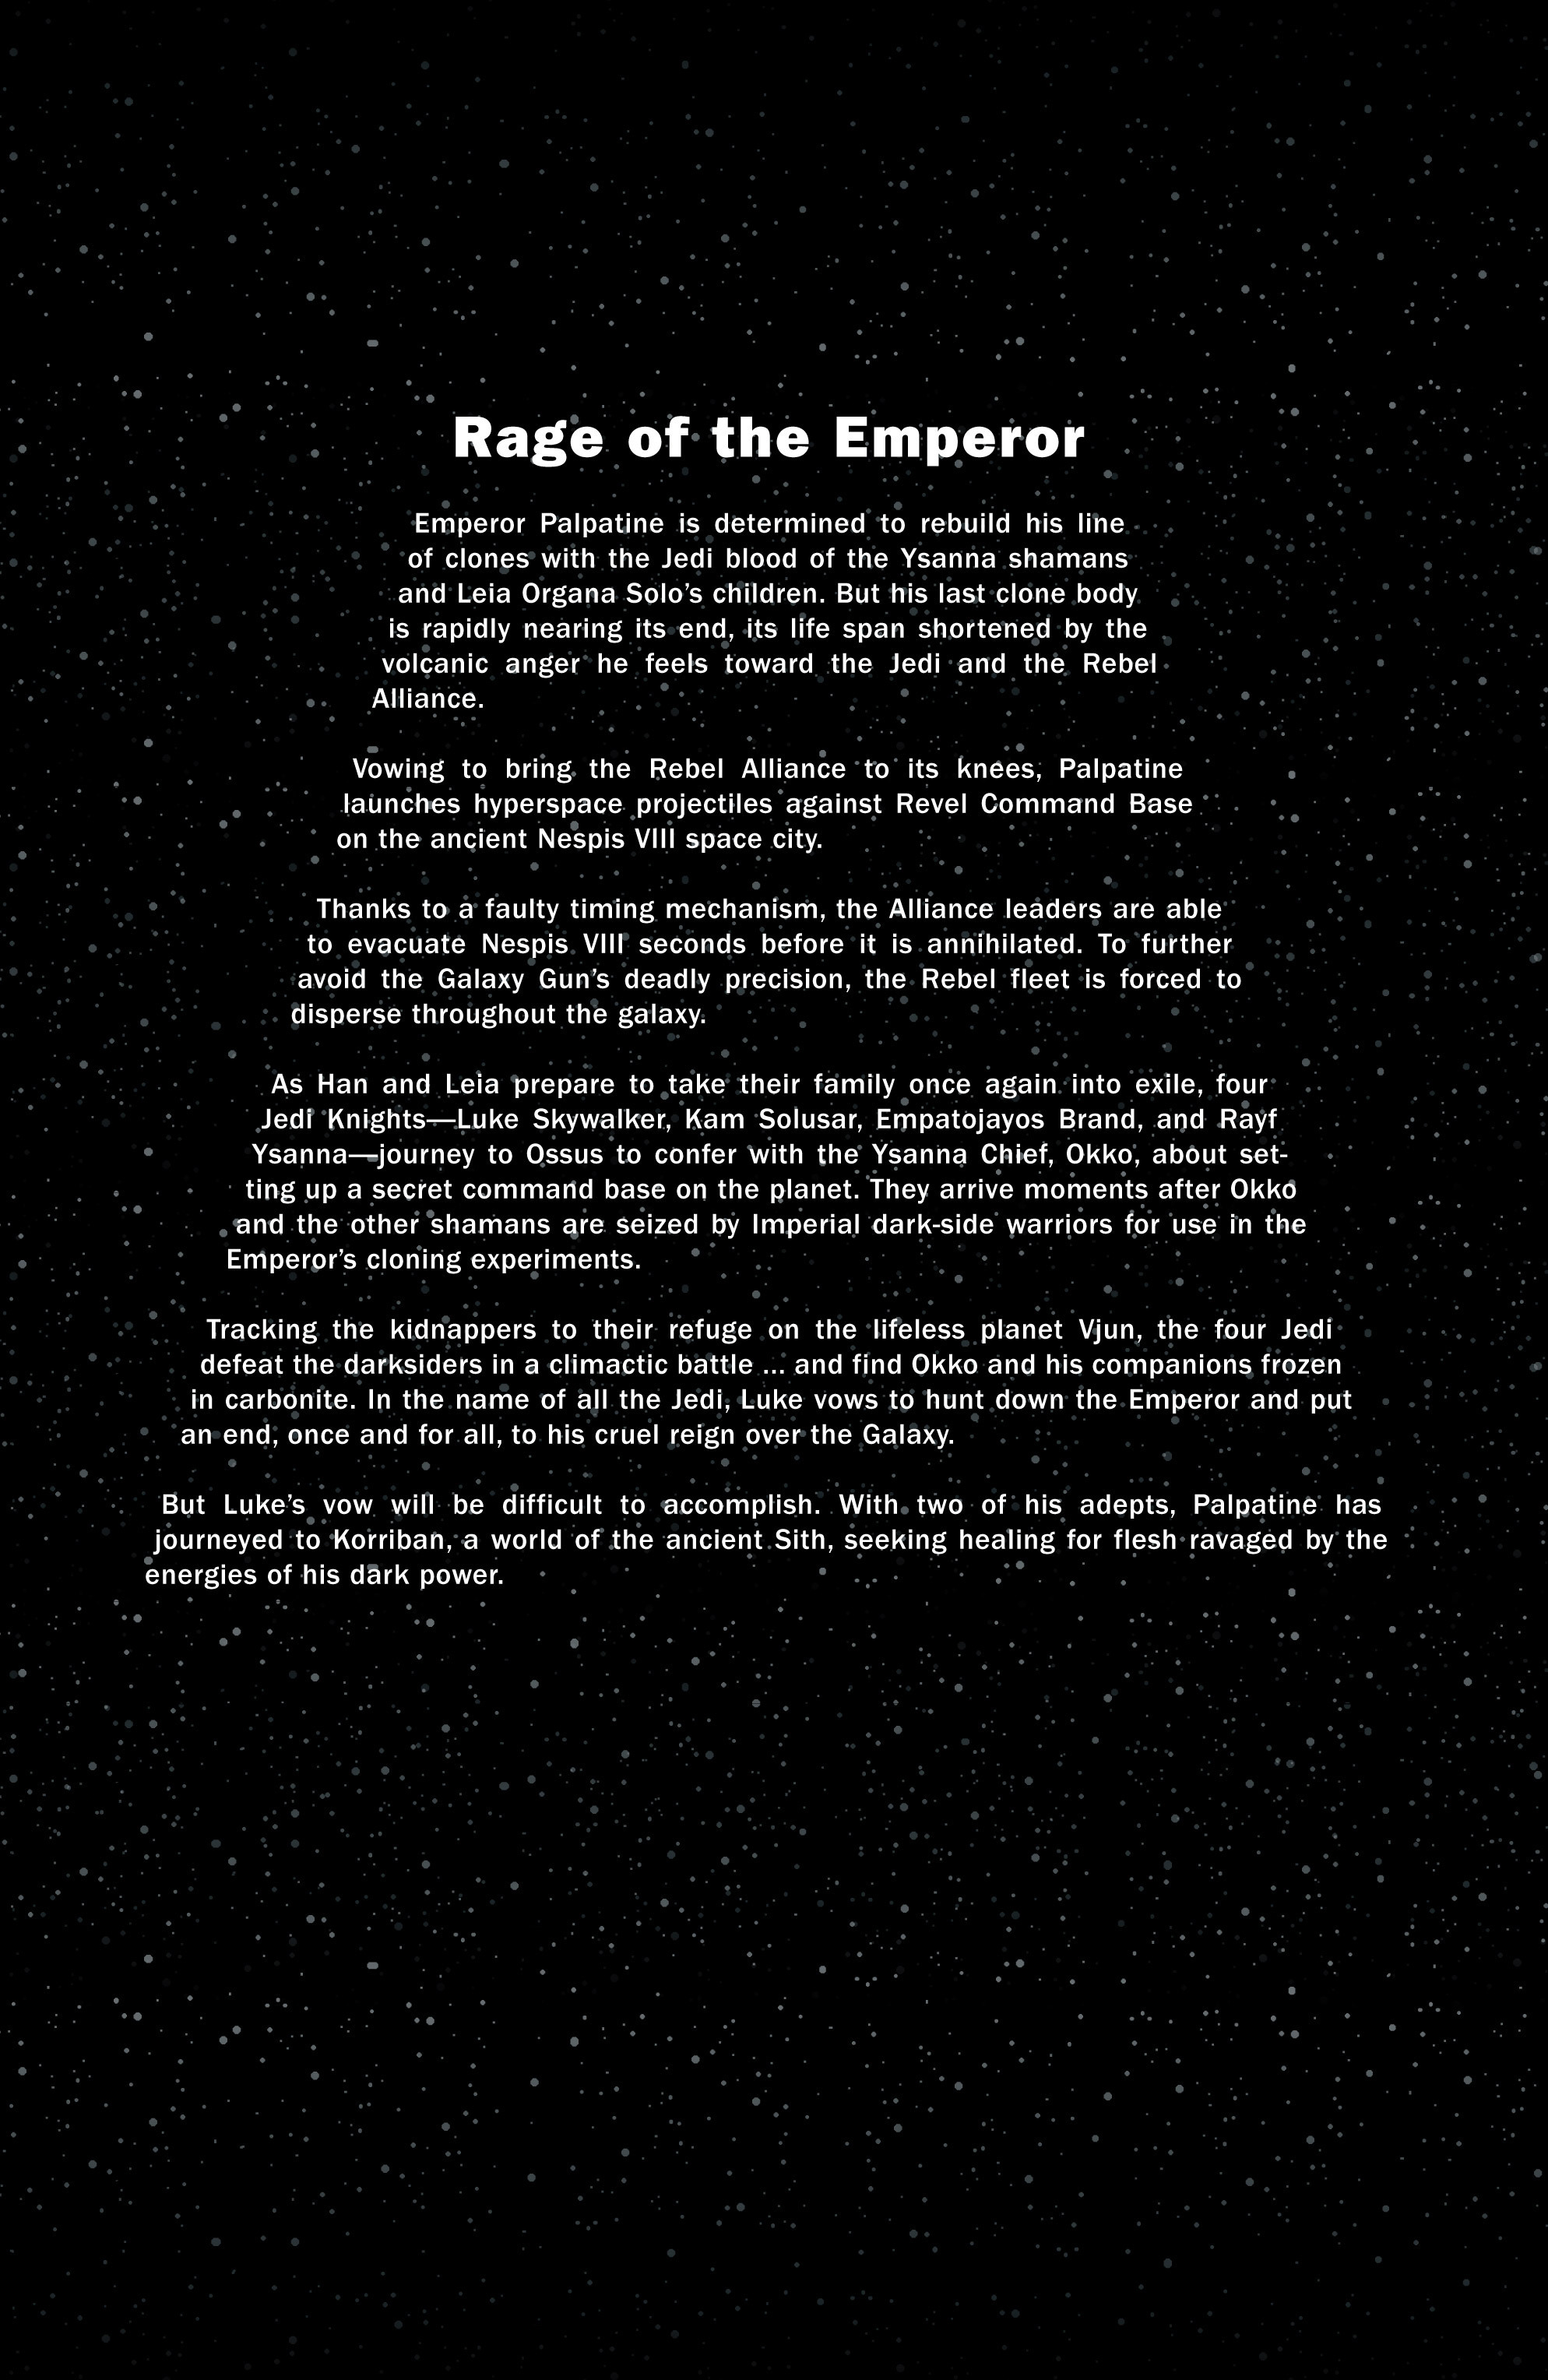 Read online Star Wars: Empire's End comic -  Issue #2 - 3